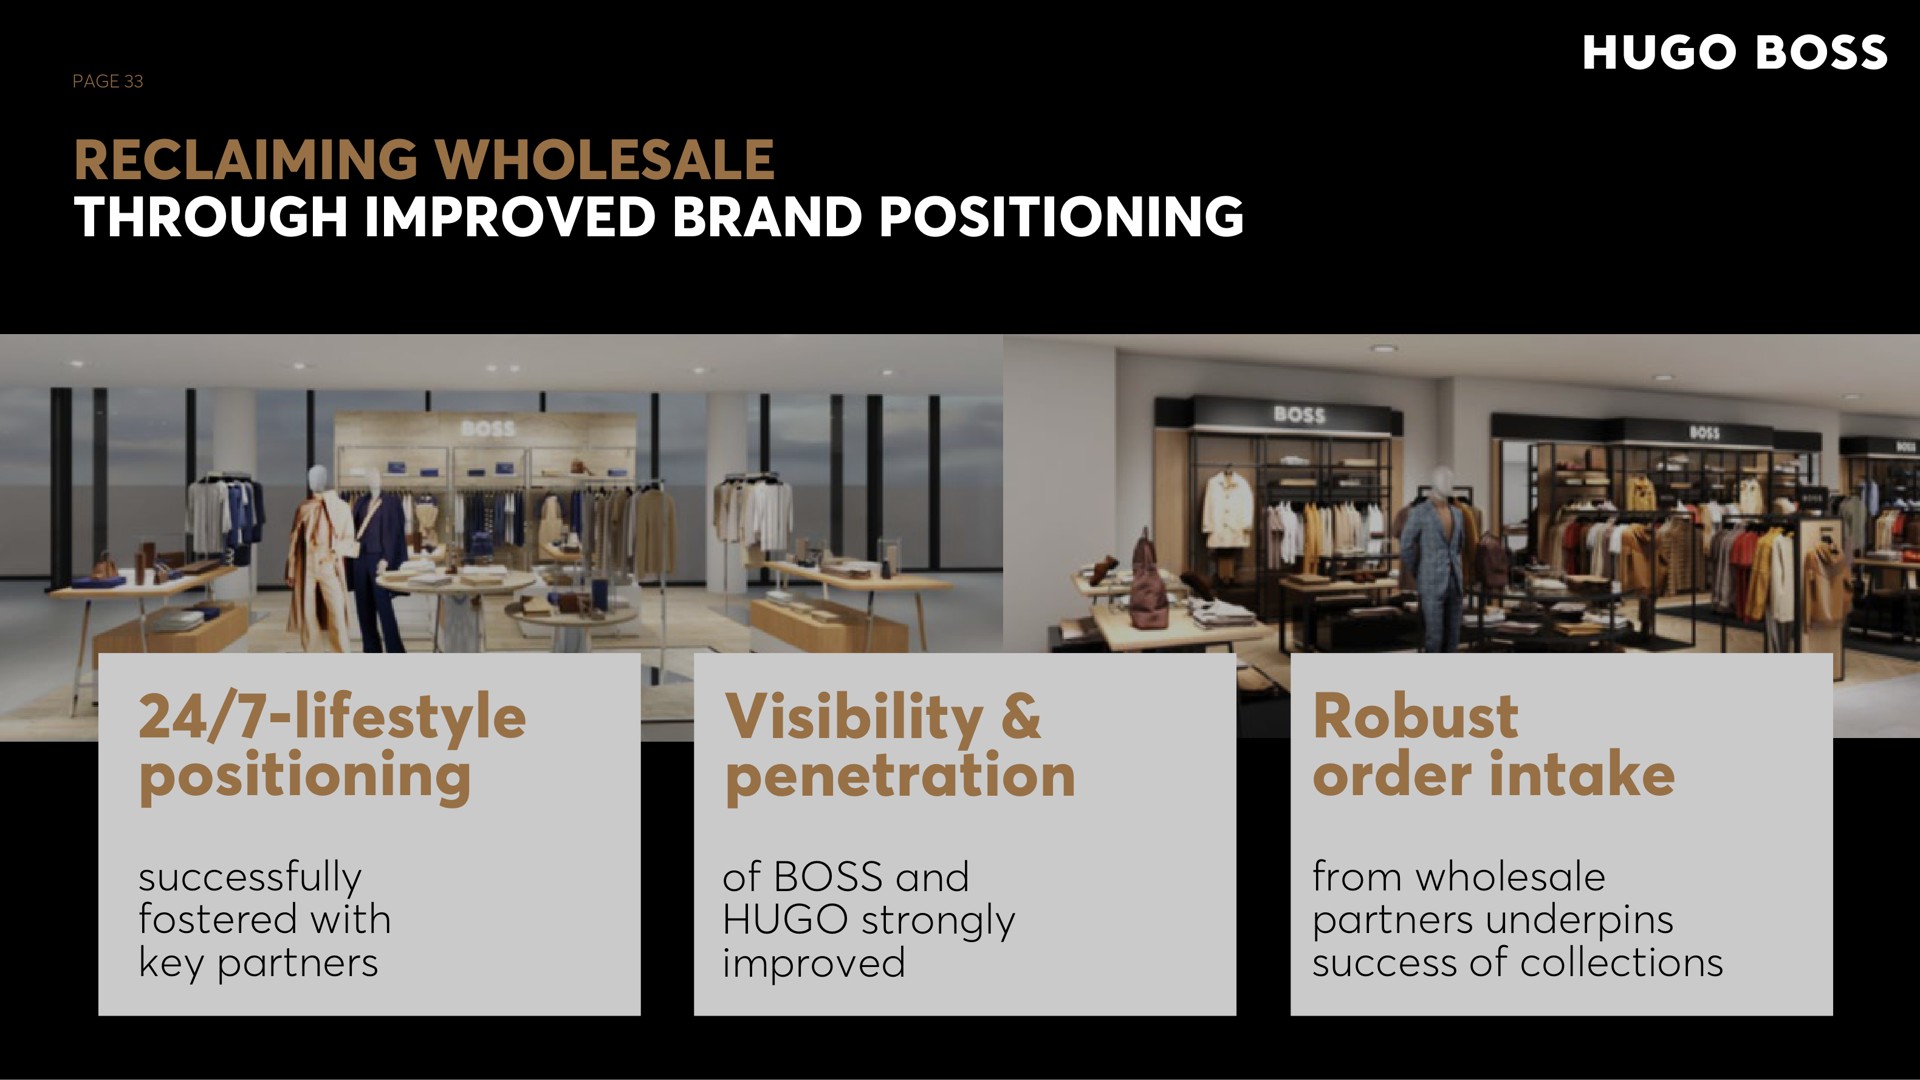 page reclaiming wholesale through improved brand positioning positioning visibility penetration successfully fostered with key partners of boss and strongly improved robust order intake from wholesale partners underpins success of collections | Hugo Boss